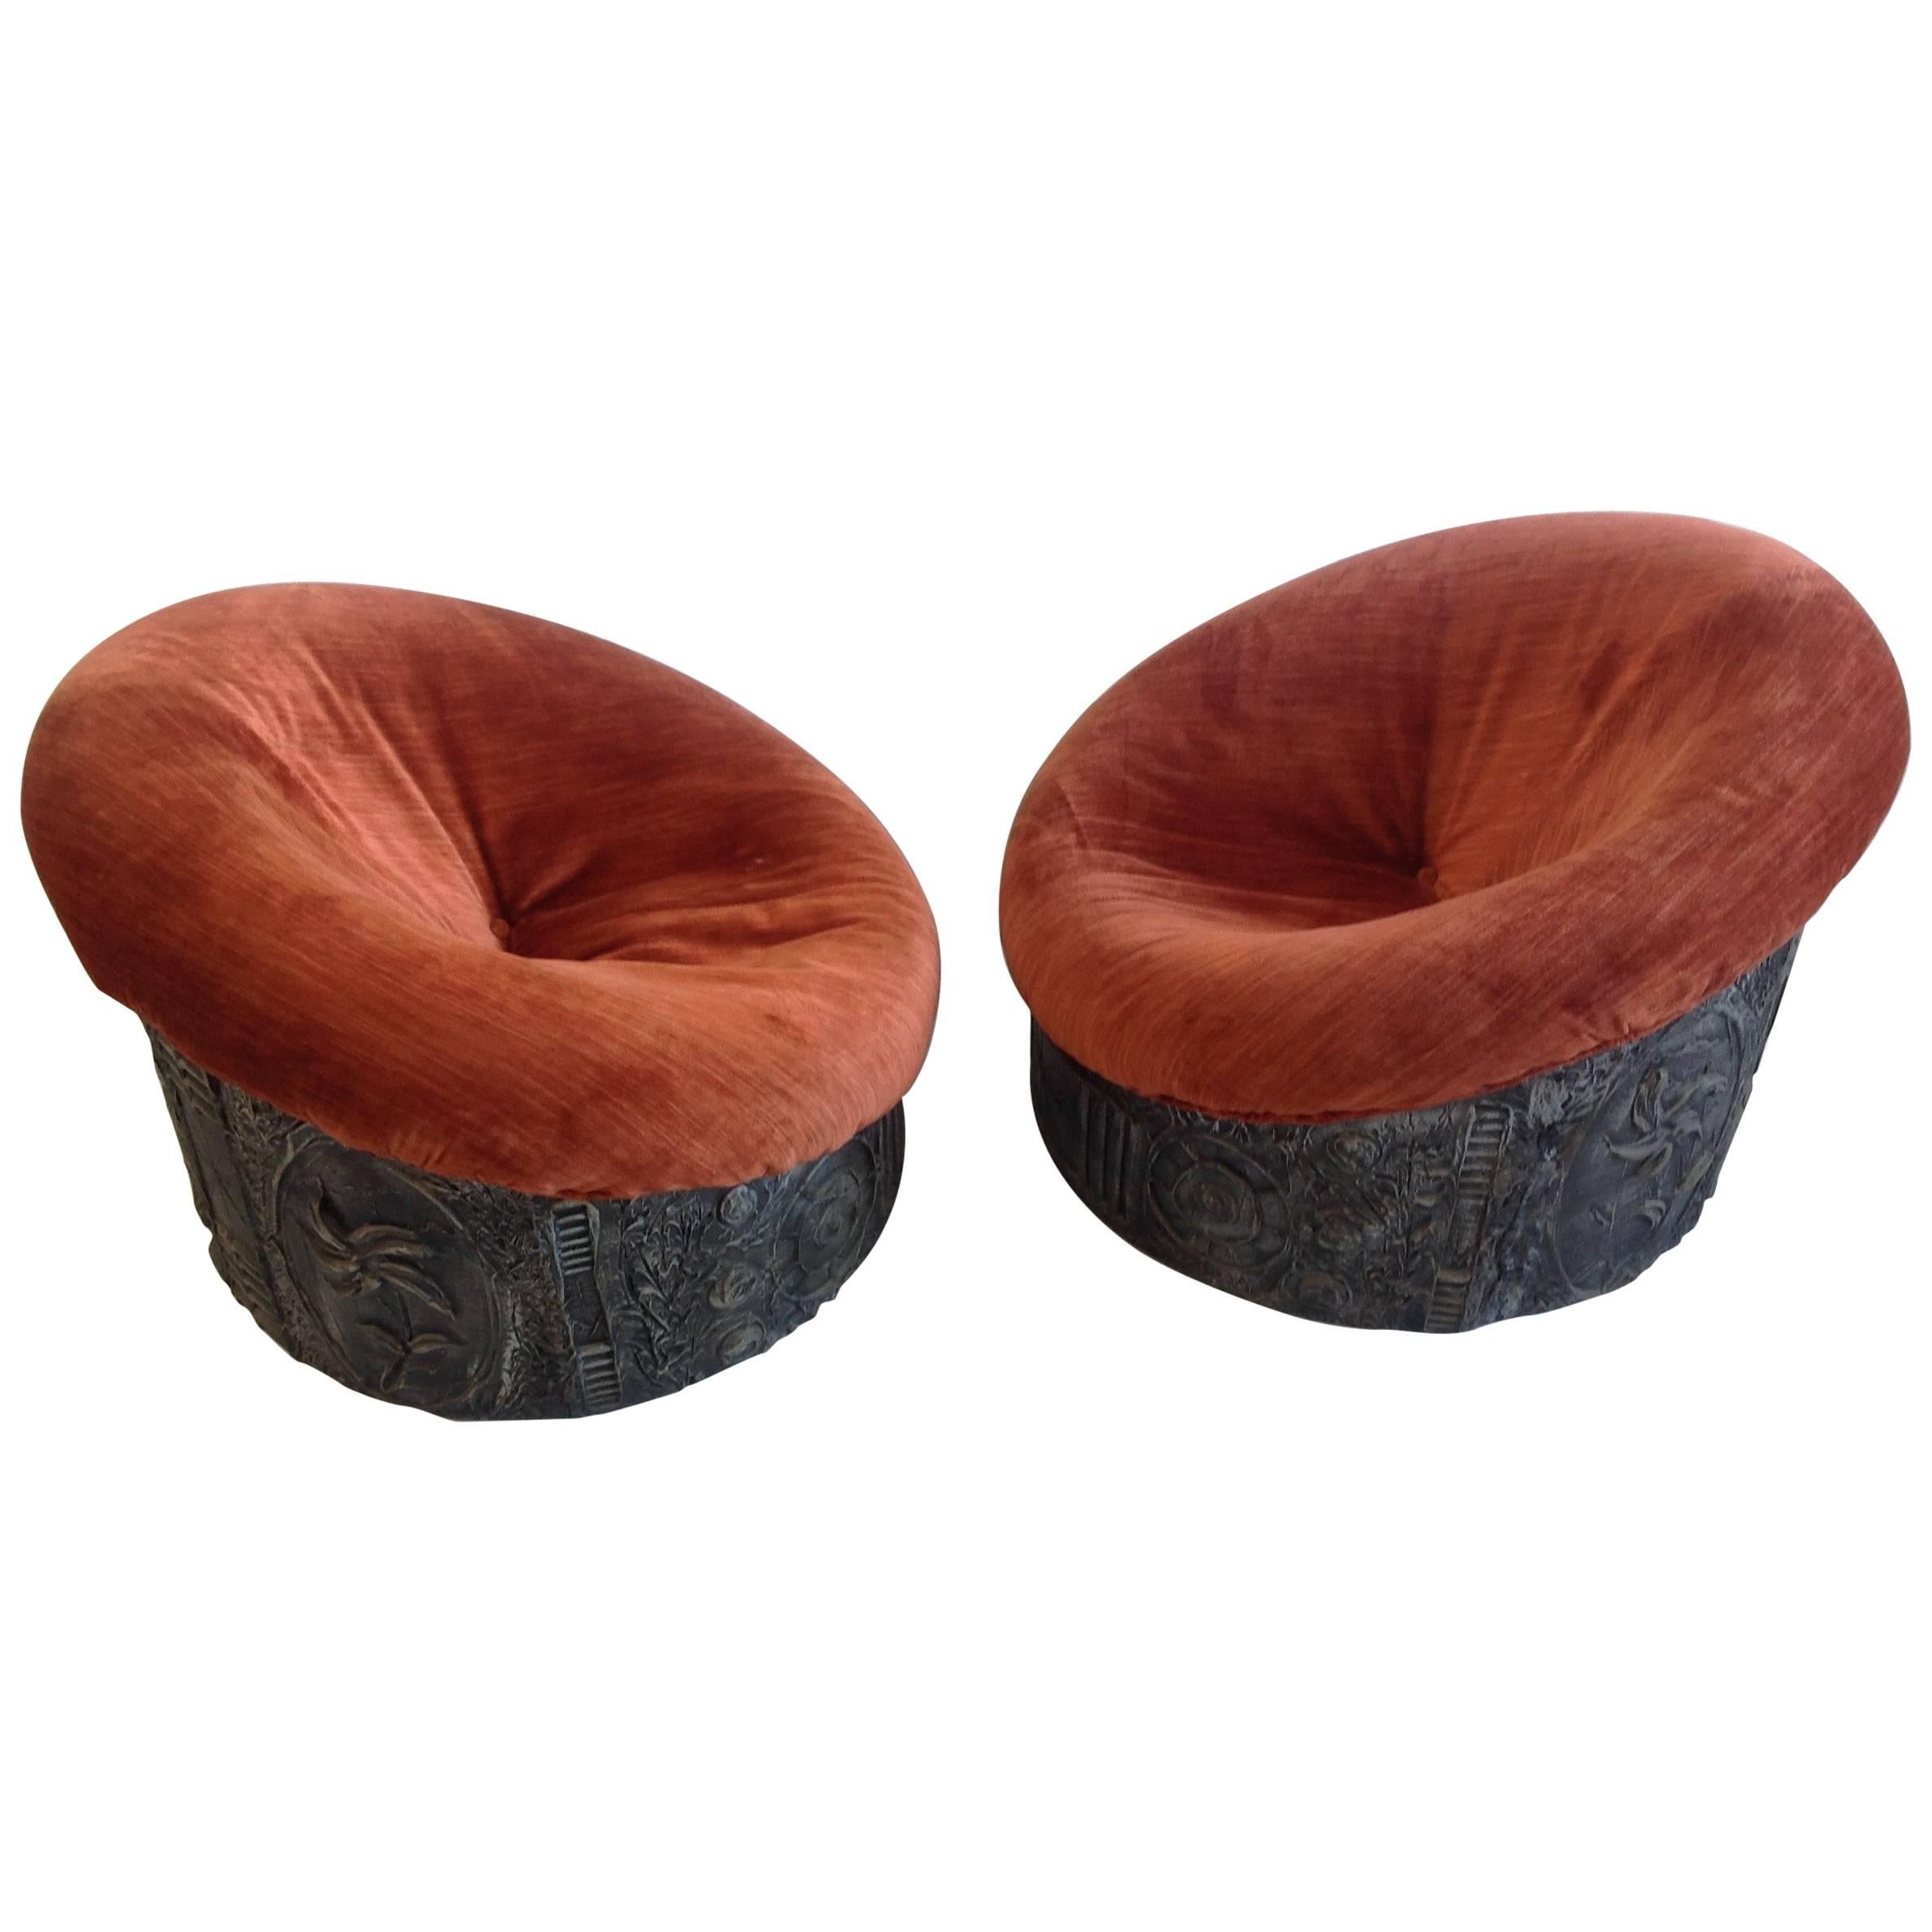 Amazing Pair of Brutalist Chairs Designed, Adrian Pearsall for Craft Associates